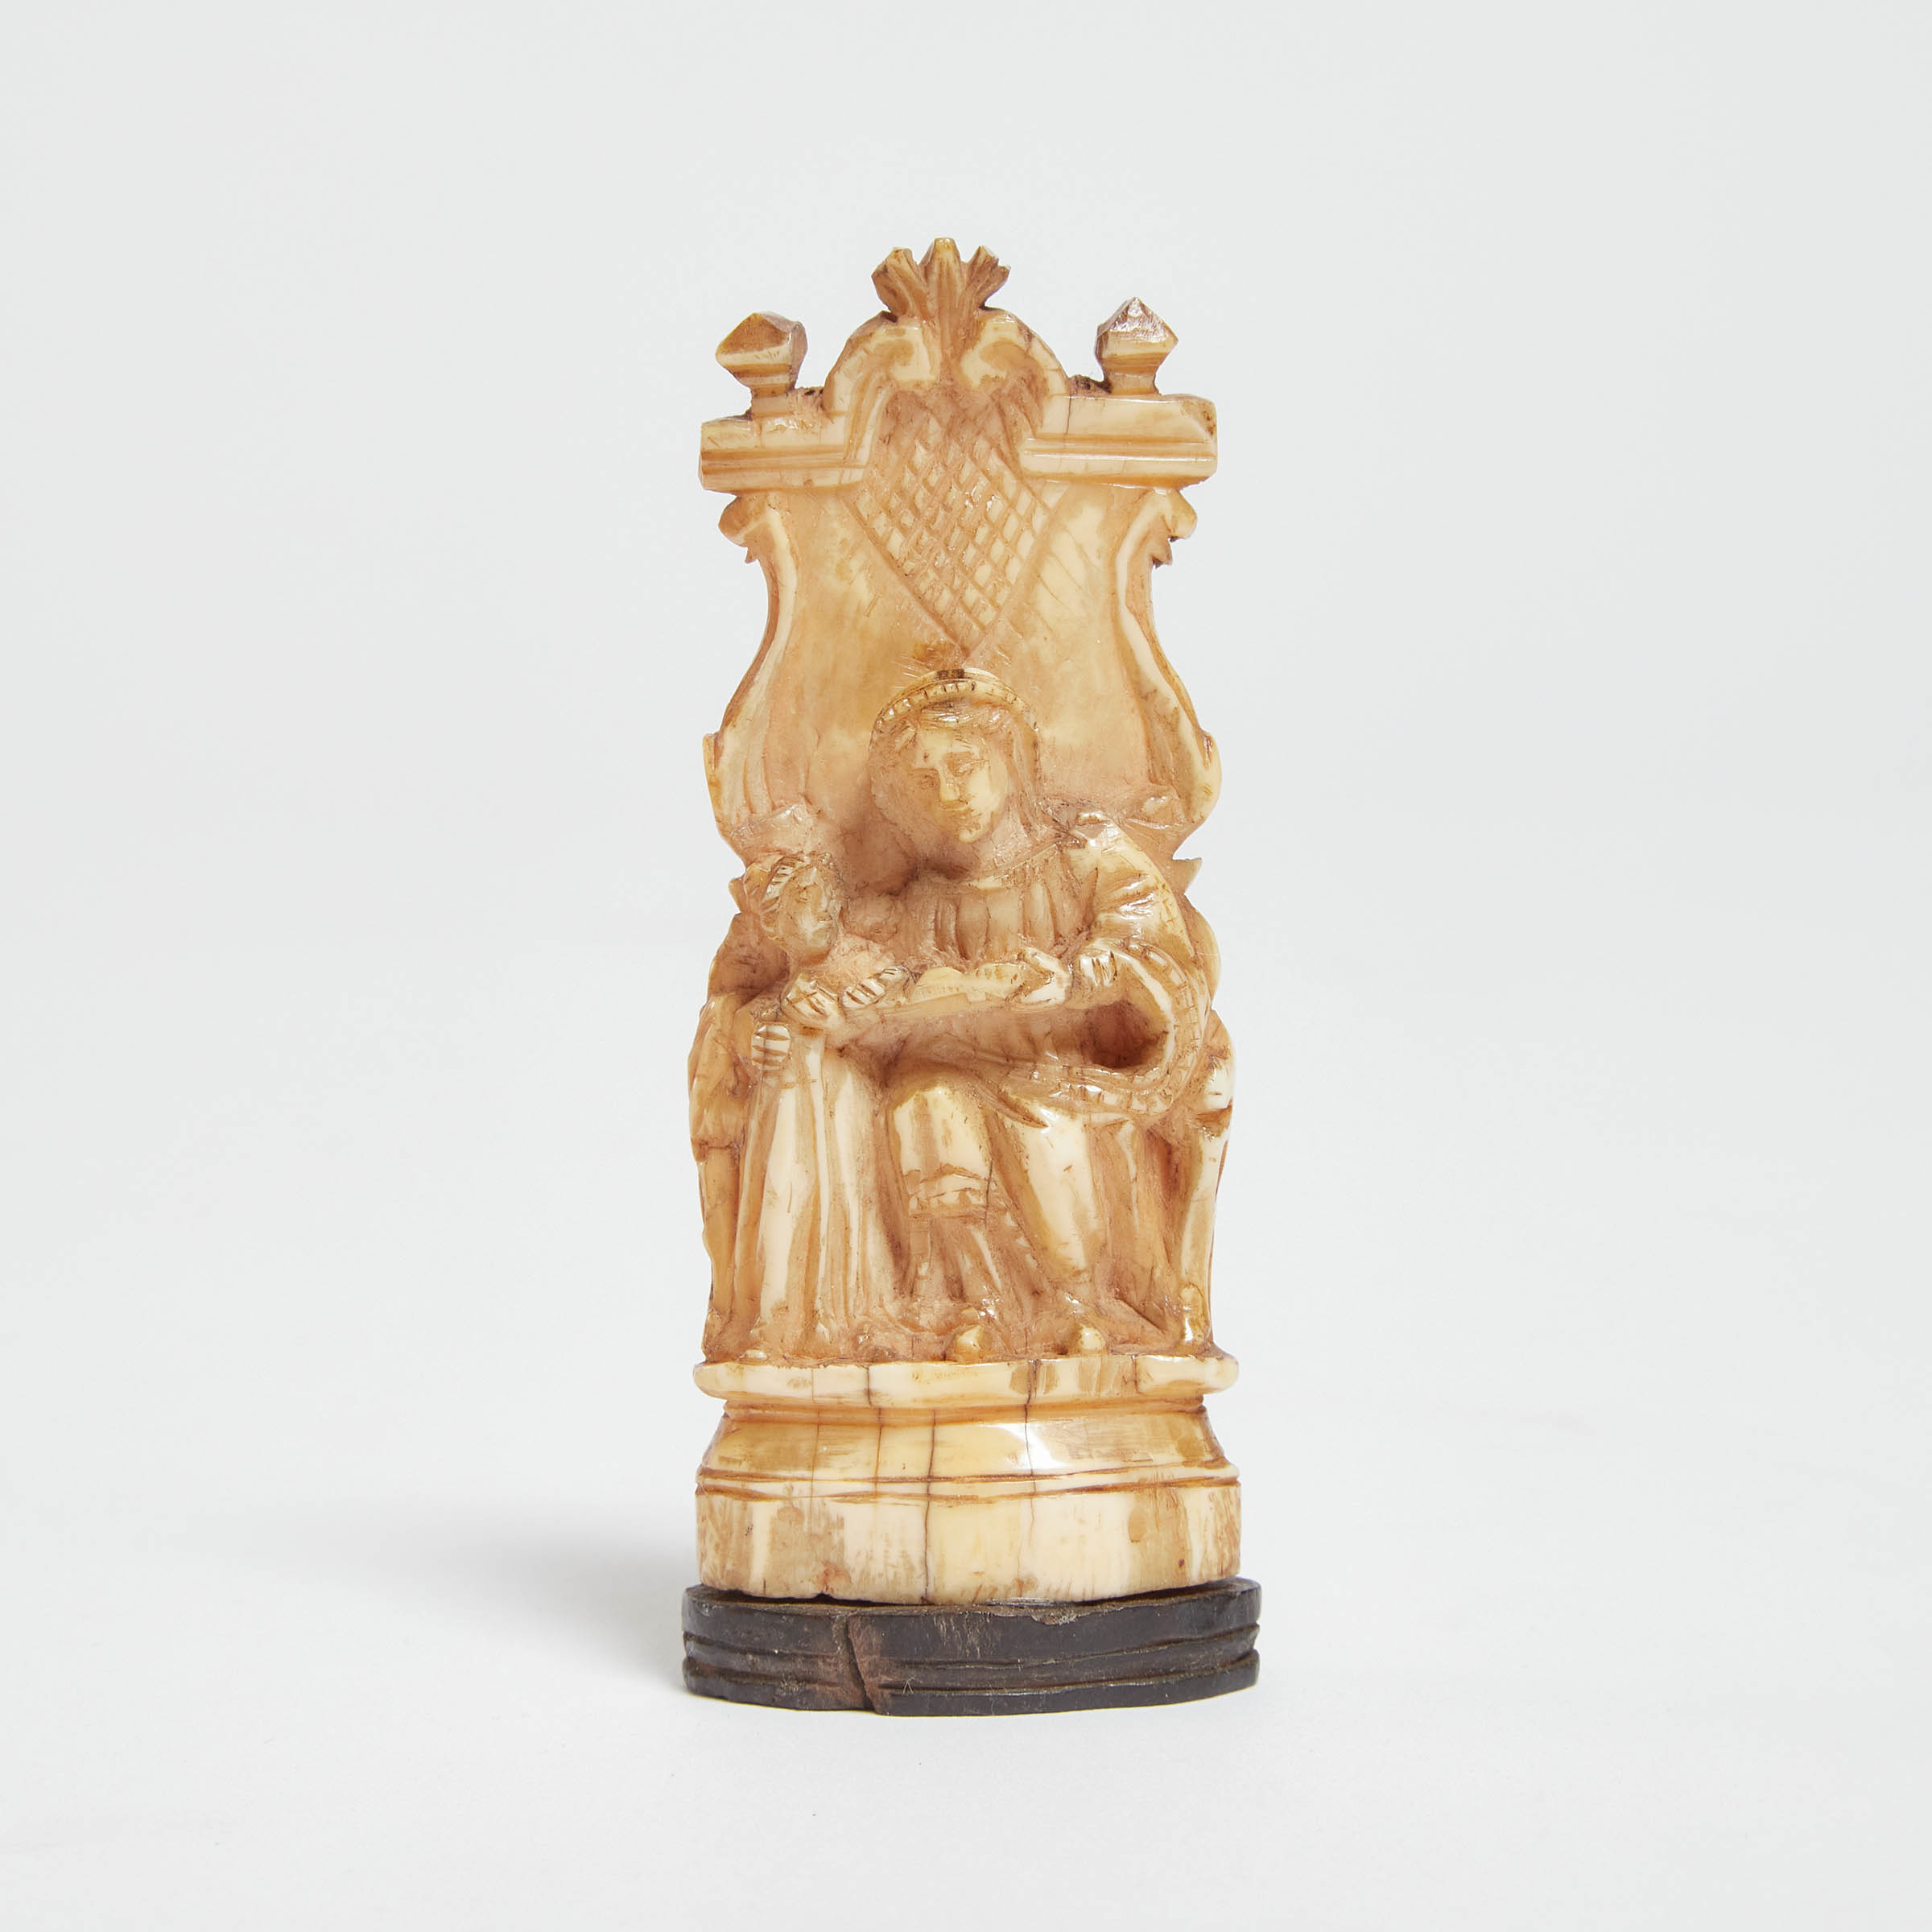 Indo-Portuguese Ivory Group of